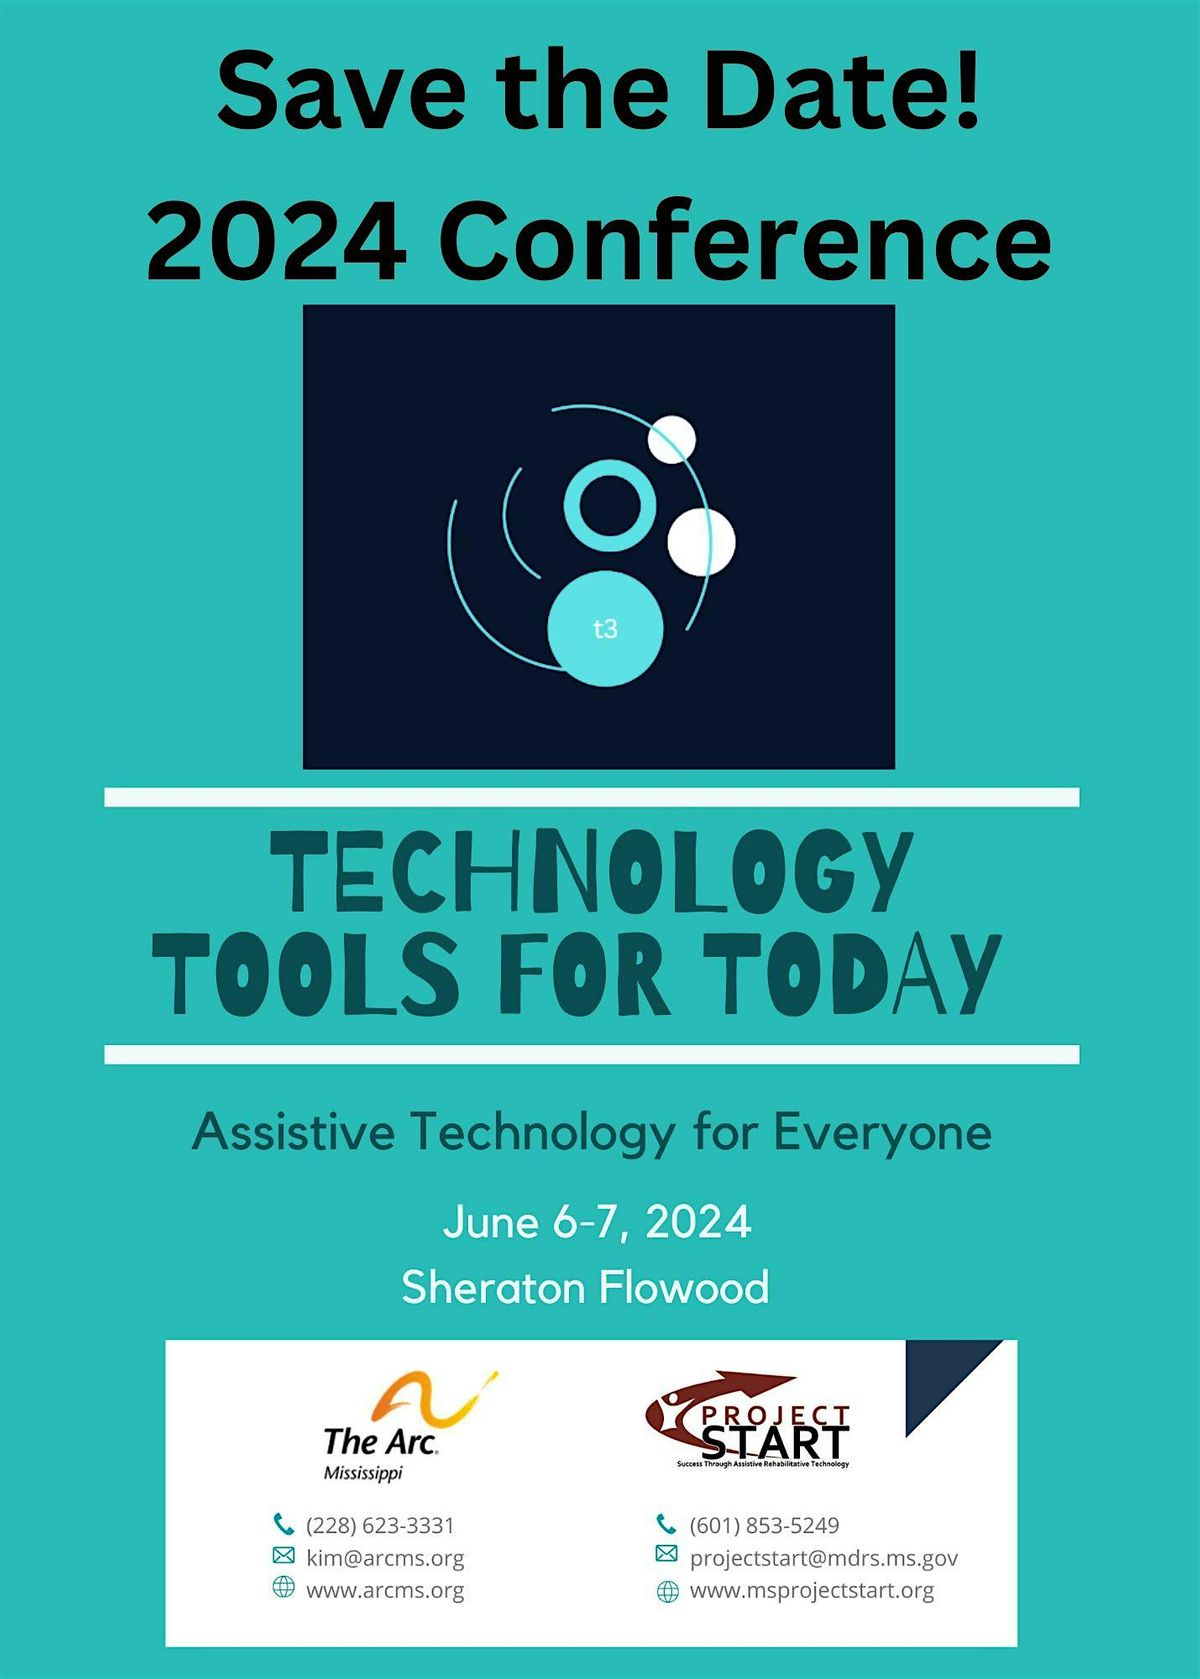 Mississippi's Assistive Technology for Everyone 2024